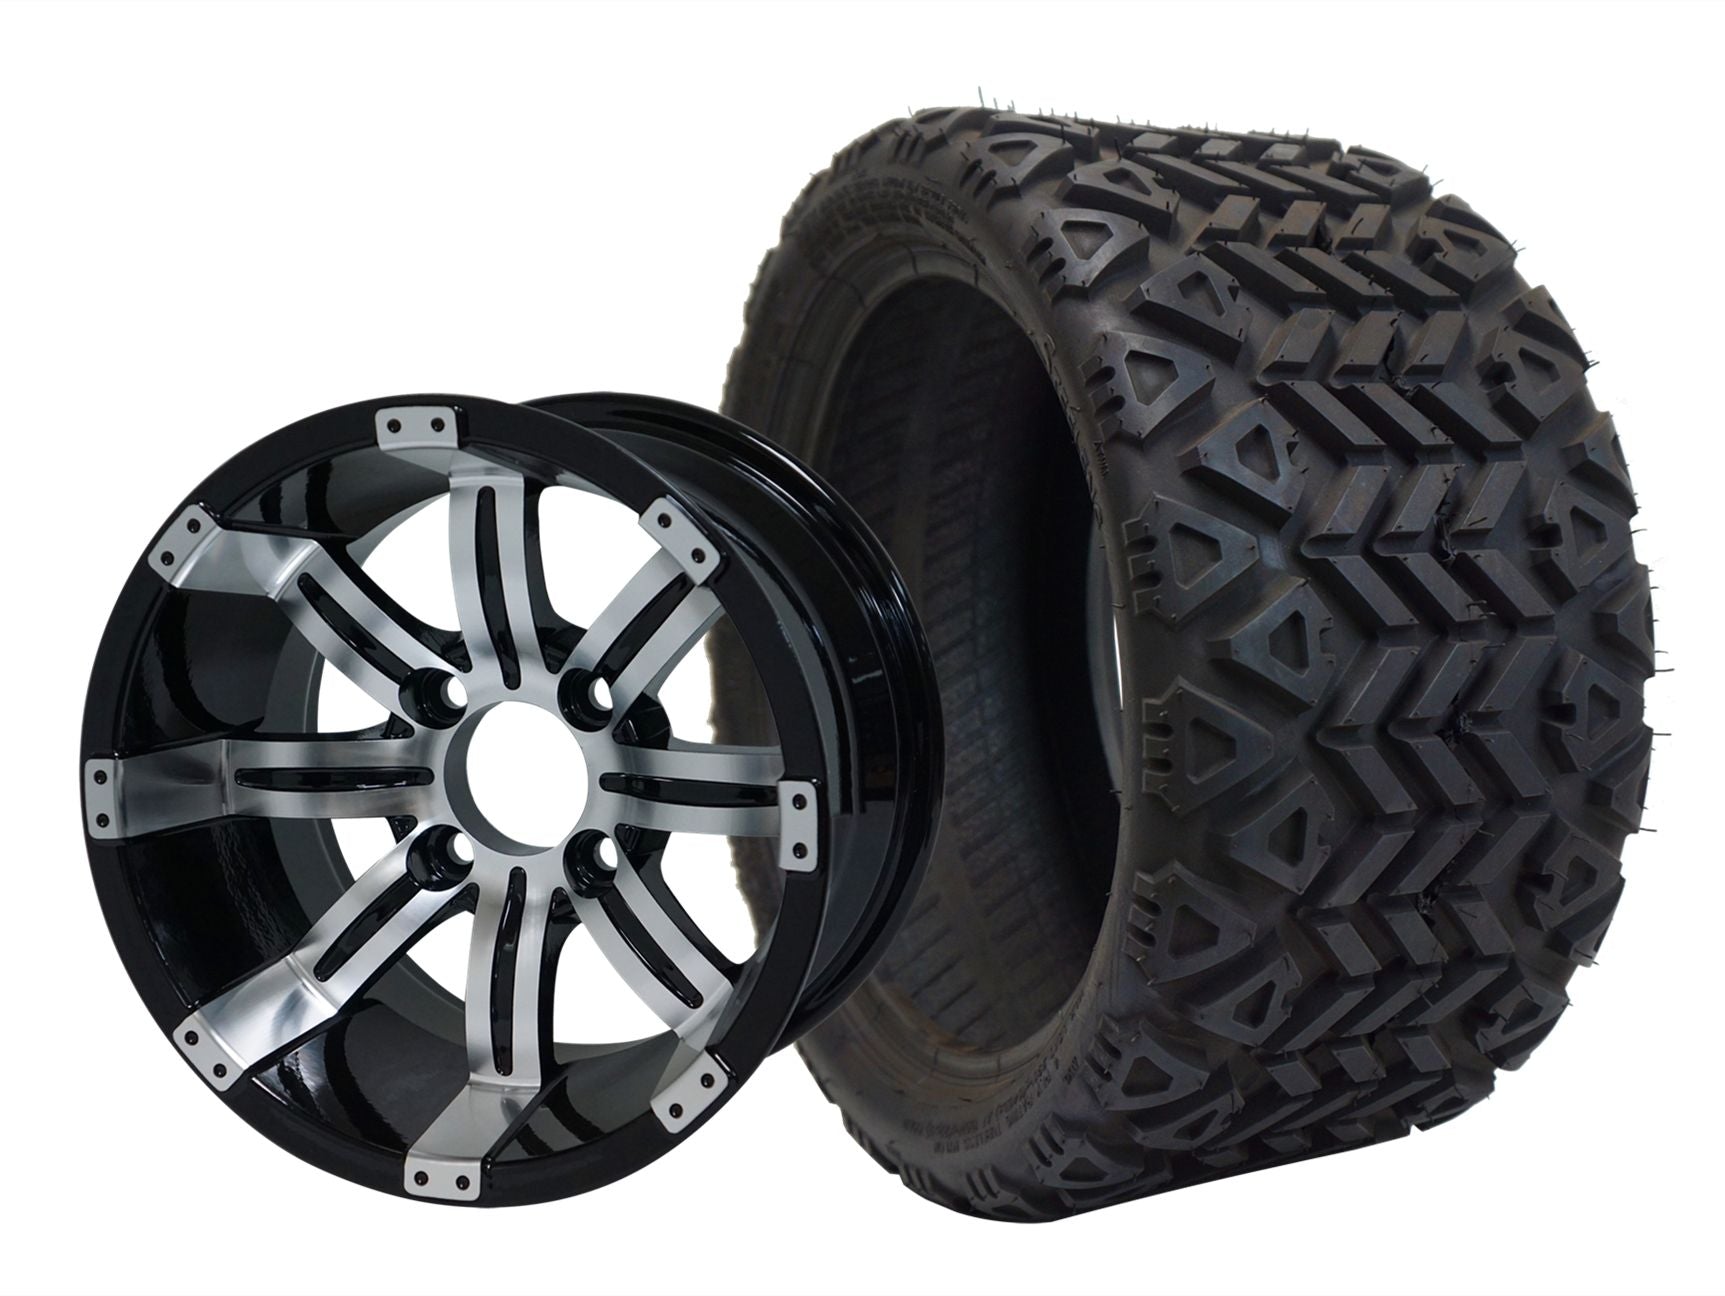 SGC 12" Tempest Machined/Black Wheel - Aluminum Alloy STEELENG 20"x10"-12" All Terrain Tire DOT approved WH1234-TR1207